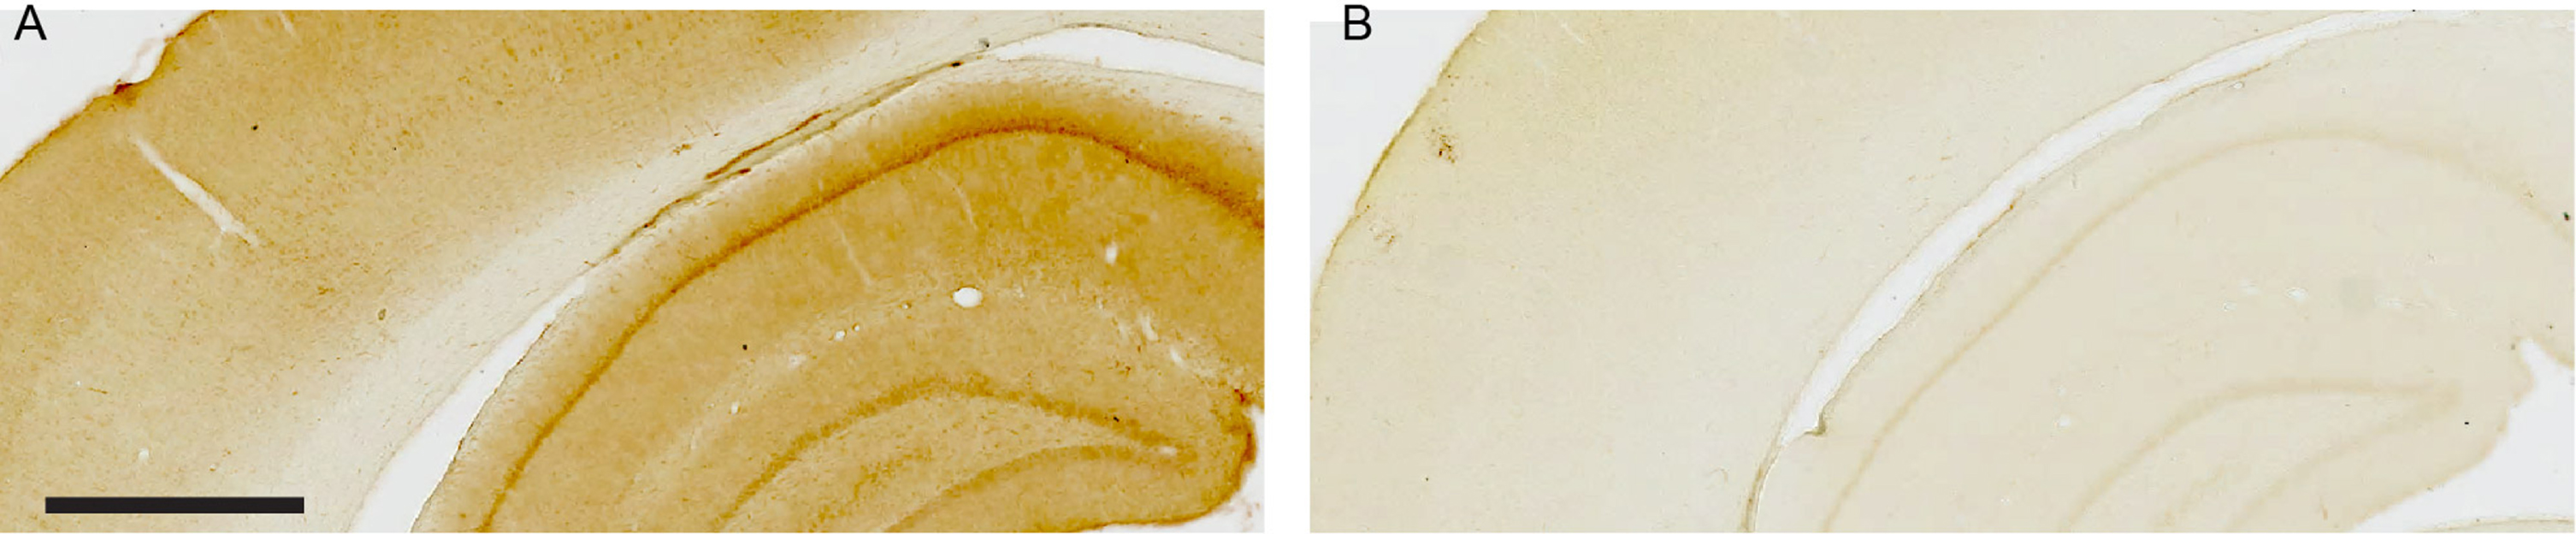 Omission of the anti-Aβ42 primary antibody demonstrates lack of background labeling. A) Part of neocortex and the dorsal hippocampus after three-day incubation with anti-Aβ42 primary antibody followed by visualization with 3,3’-Diaminobenzidine as the chromogen (see Methods for details). B) Adjacent section undergoing identical treatment but where the anti-Aβ42 primary antibody was omitted. Sections are from an 18-month-old Wistar rat. Scale bar: (A) = 1000μm as also applies to (B).